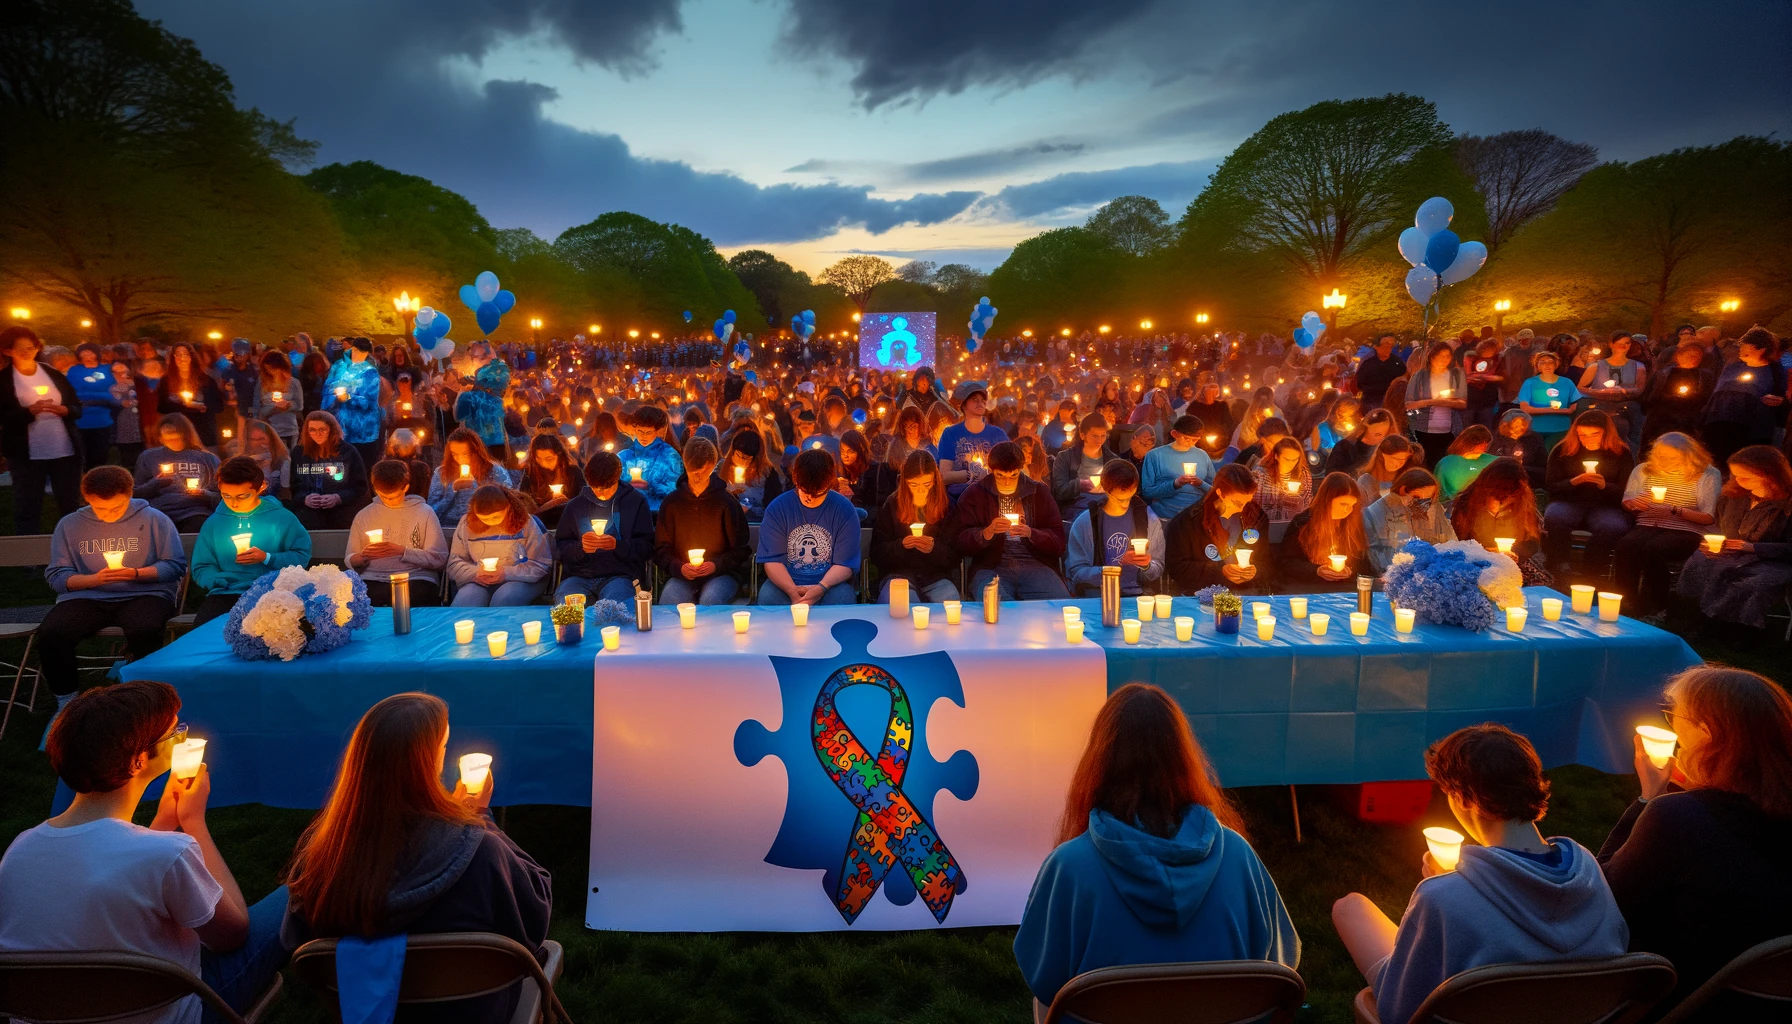 Social inclusion in schools - A heartfelt evening candlelight vigil held in a tranquil public park for Autism Awareness